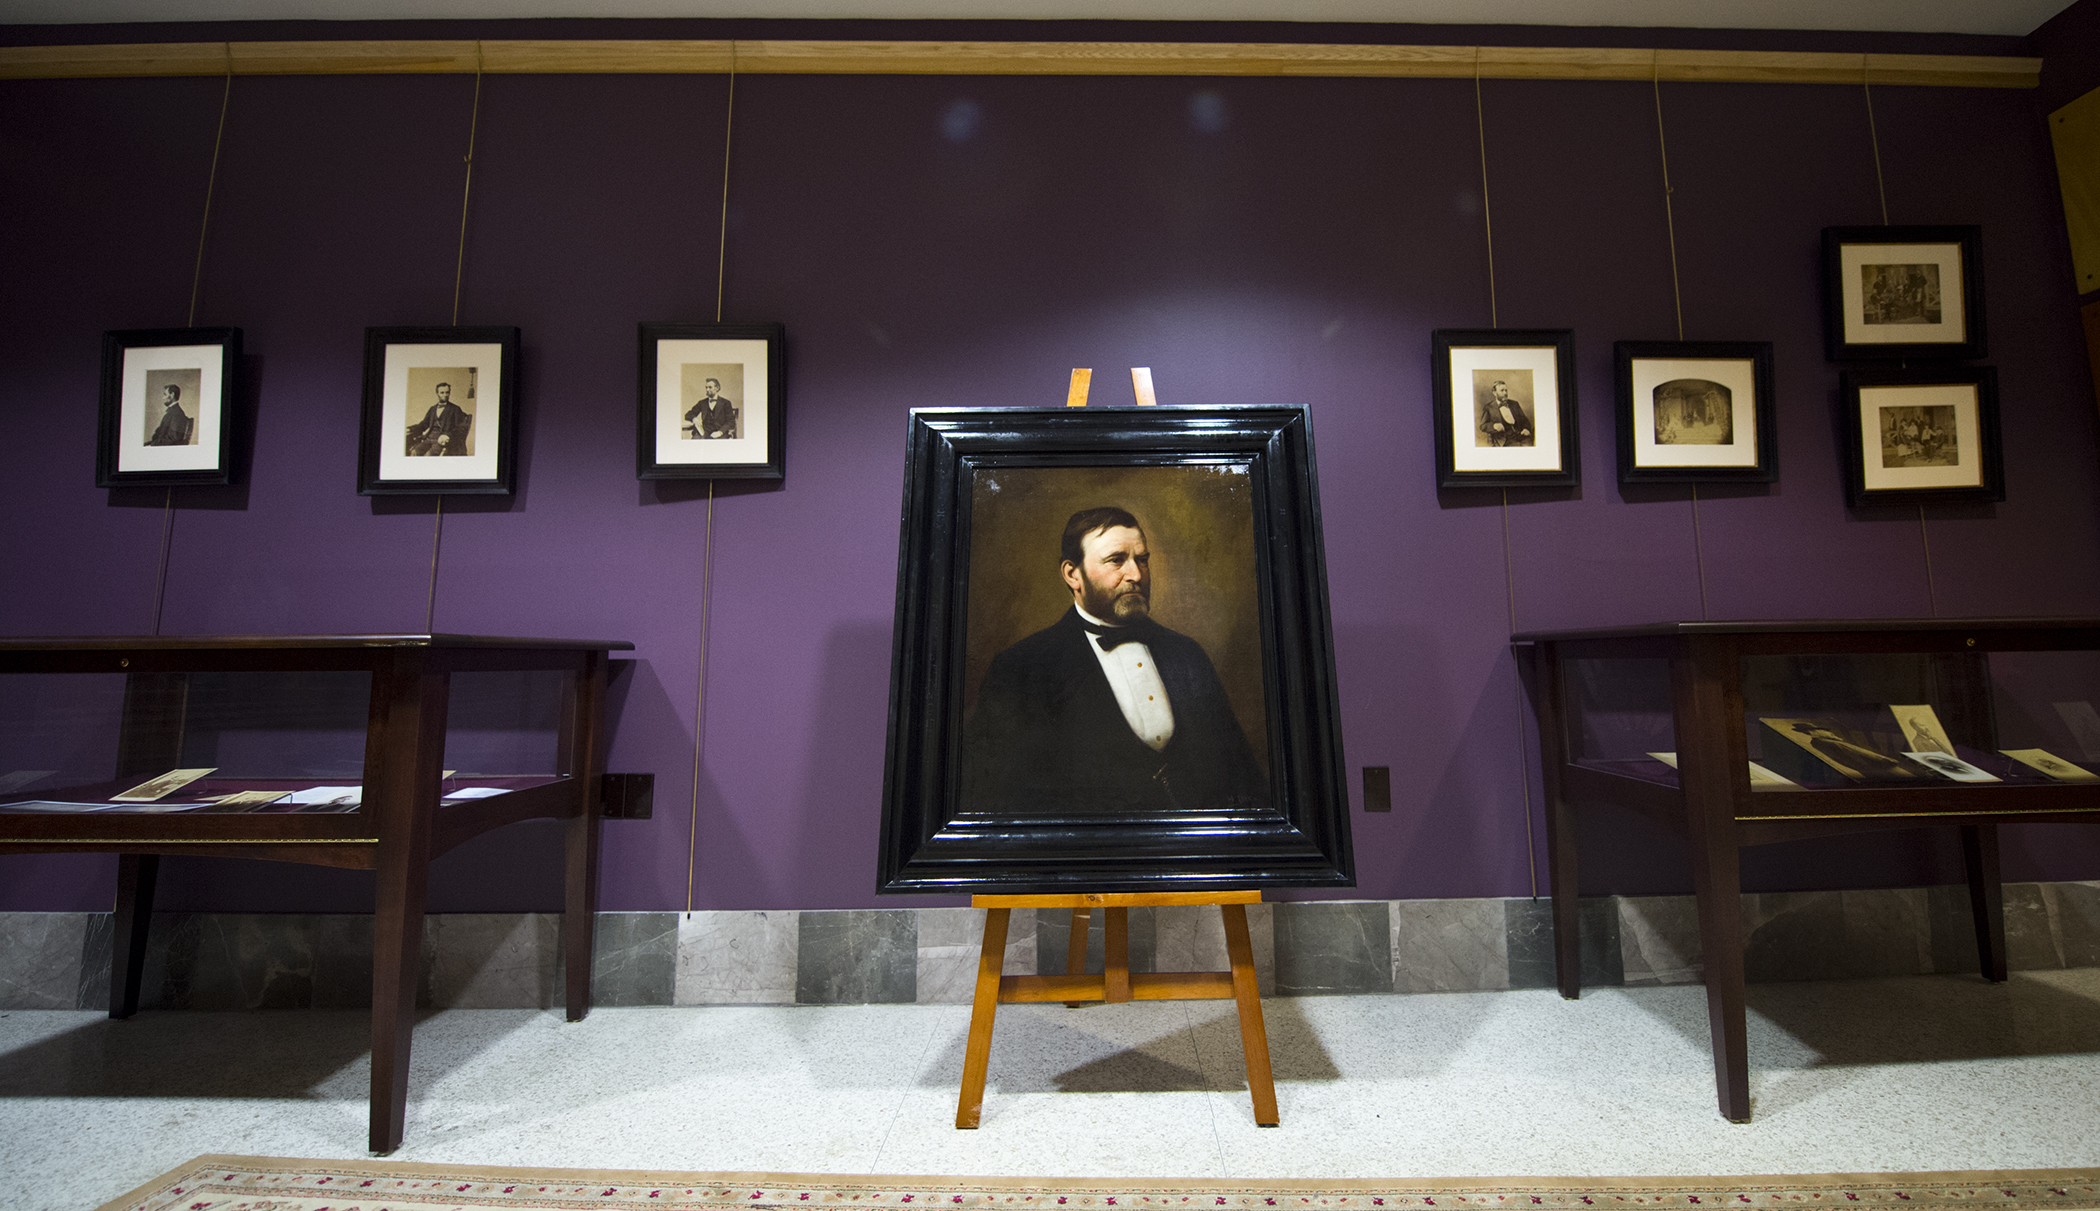 MSU's Ulysses S. Grant Presidential Library now features an exhibit titled "The President's Face: Portraits of Ulysses S. Grant and Abraham Lincoln in Context." The collection of photographs and portraits, some never before shown publicly, are on display through April 2016. 